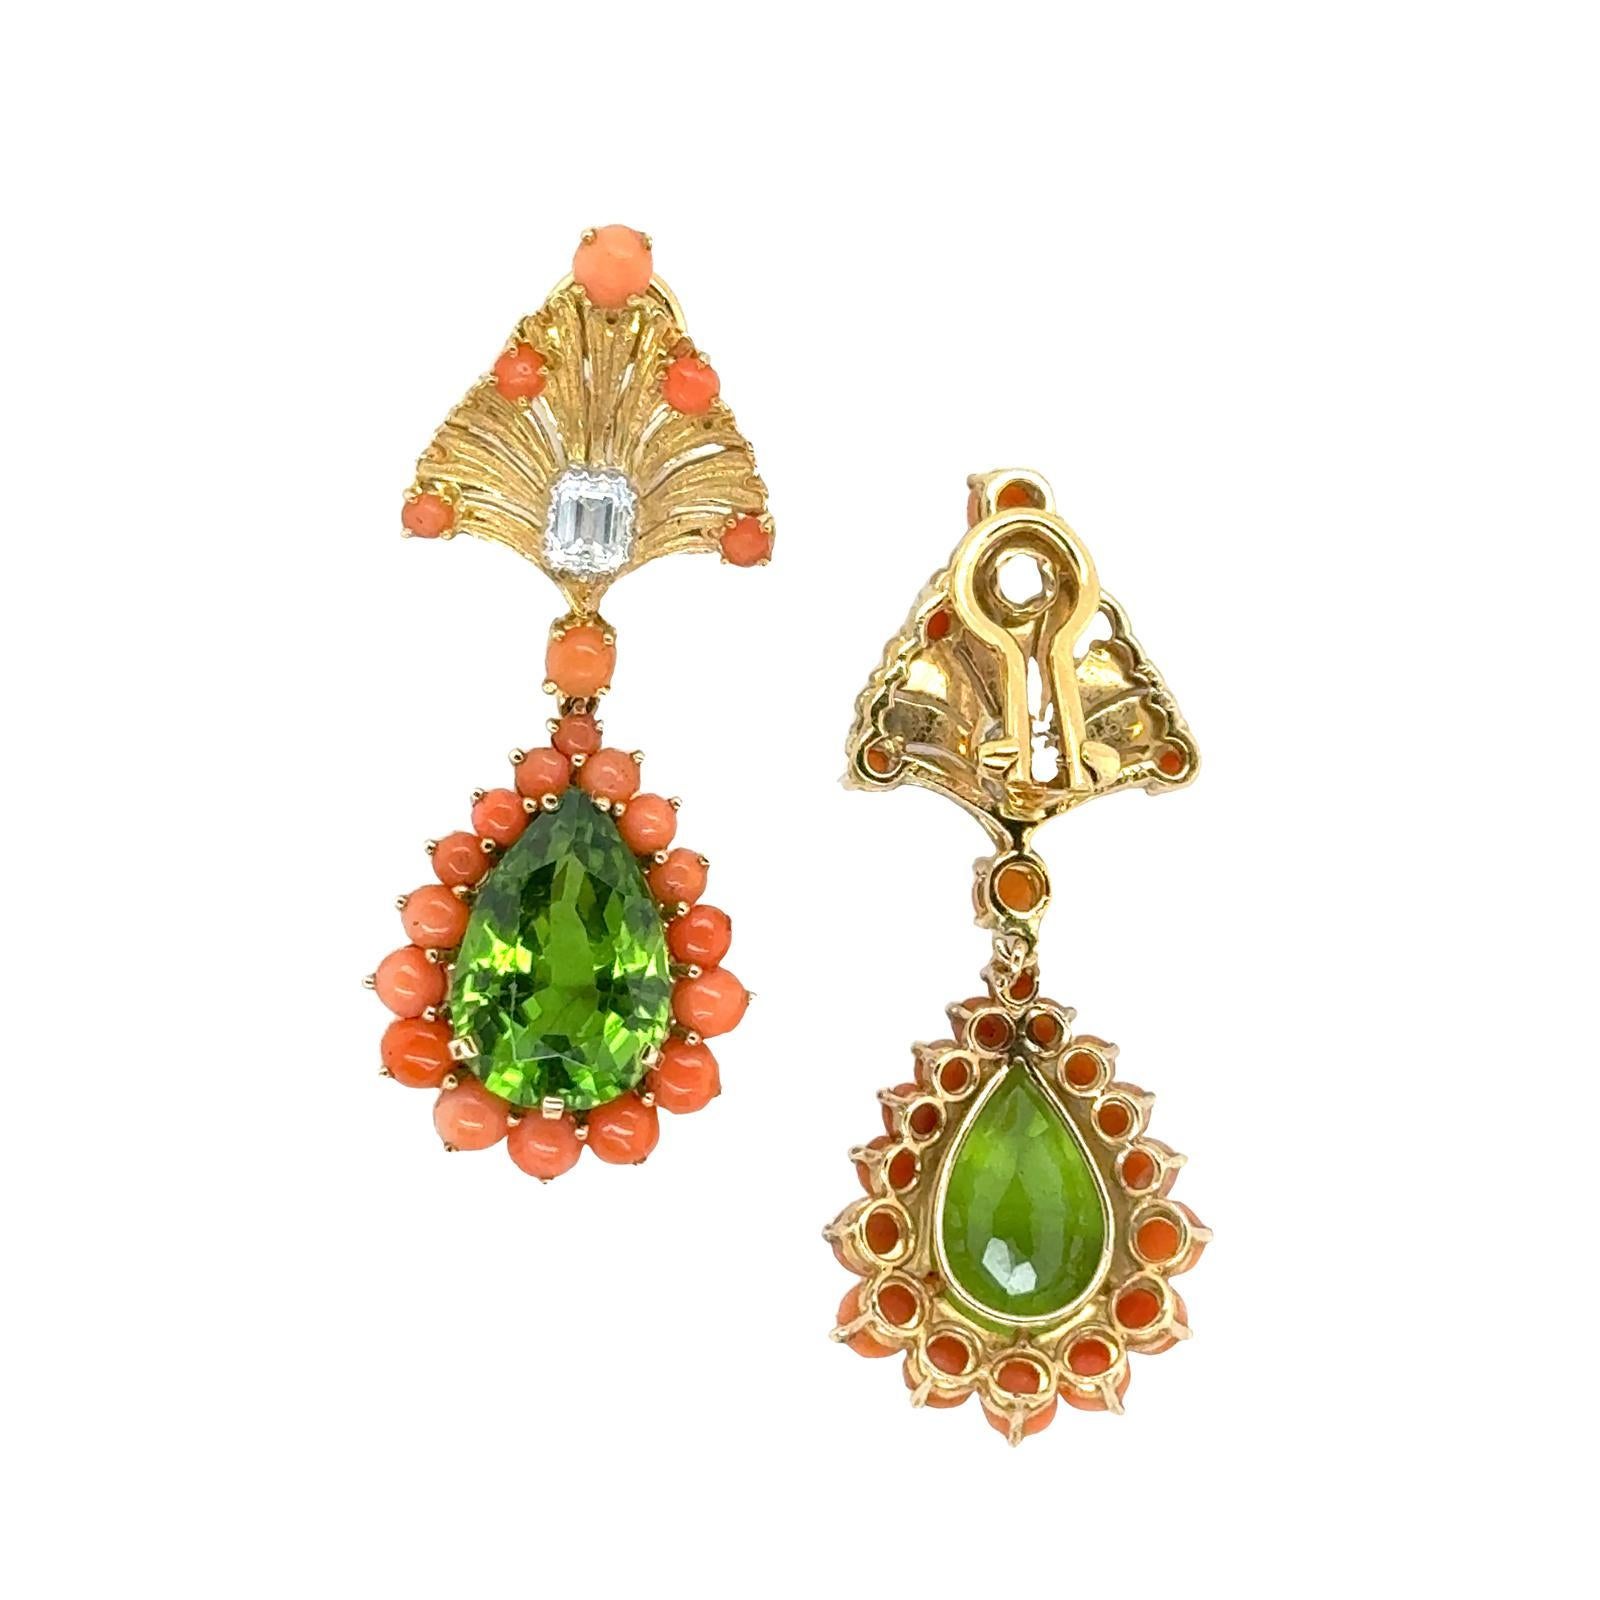 1960's Buccellati Diamond Coral & Peridot 18KYG Drop Vintage Earclip Earrings In Excellent Condition For Sale In Boca Raton, FL